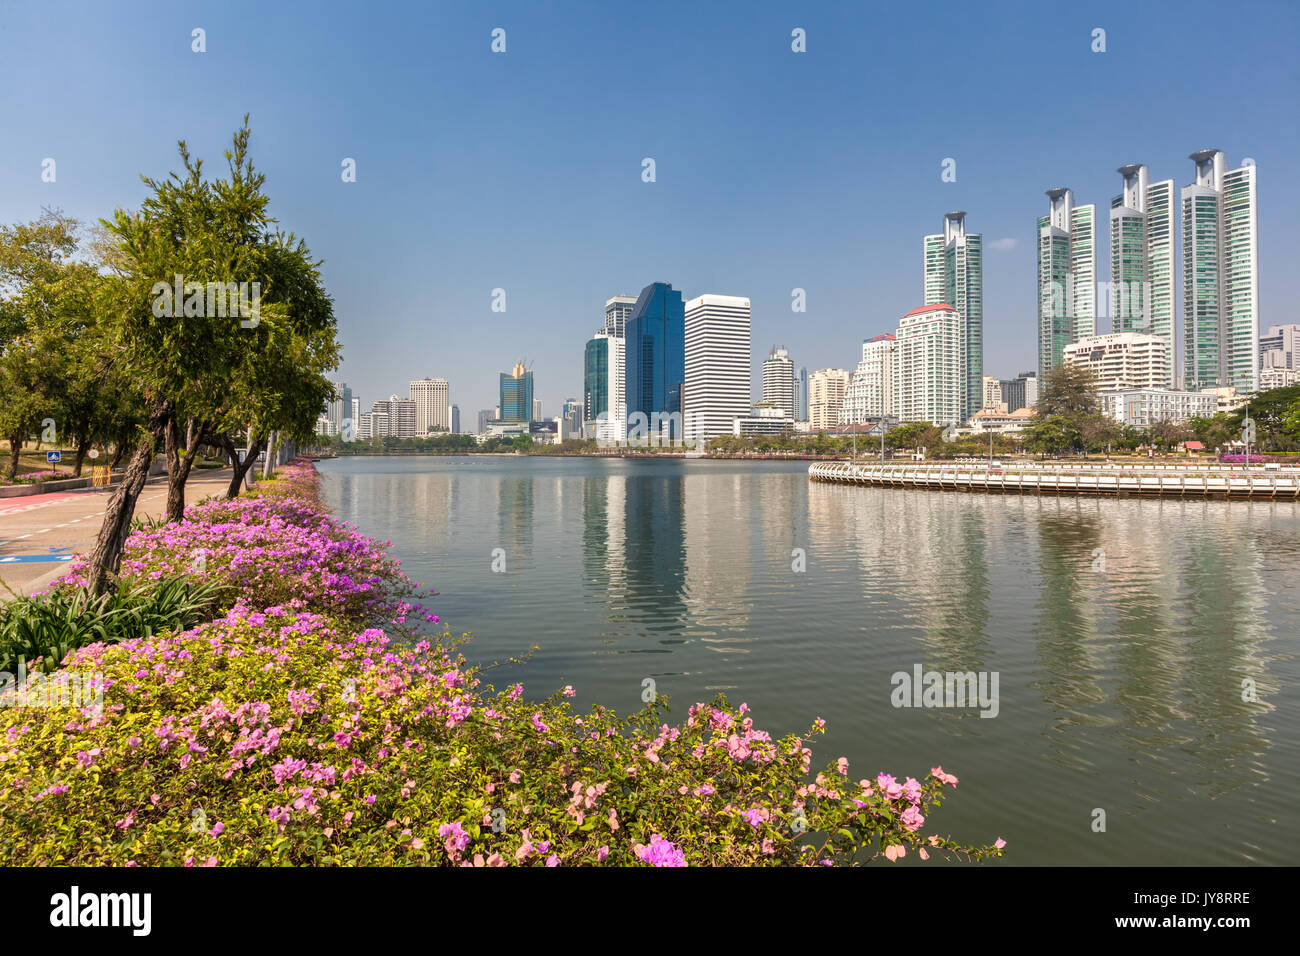 Benjakiti Park in Bangkok, Thailand skyline with Lake Ratchada, bougainvilleas and skyscrapers Stock Photo